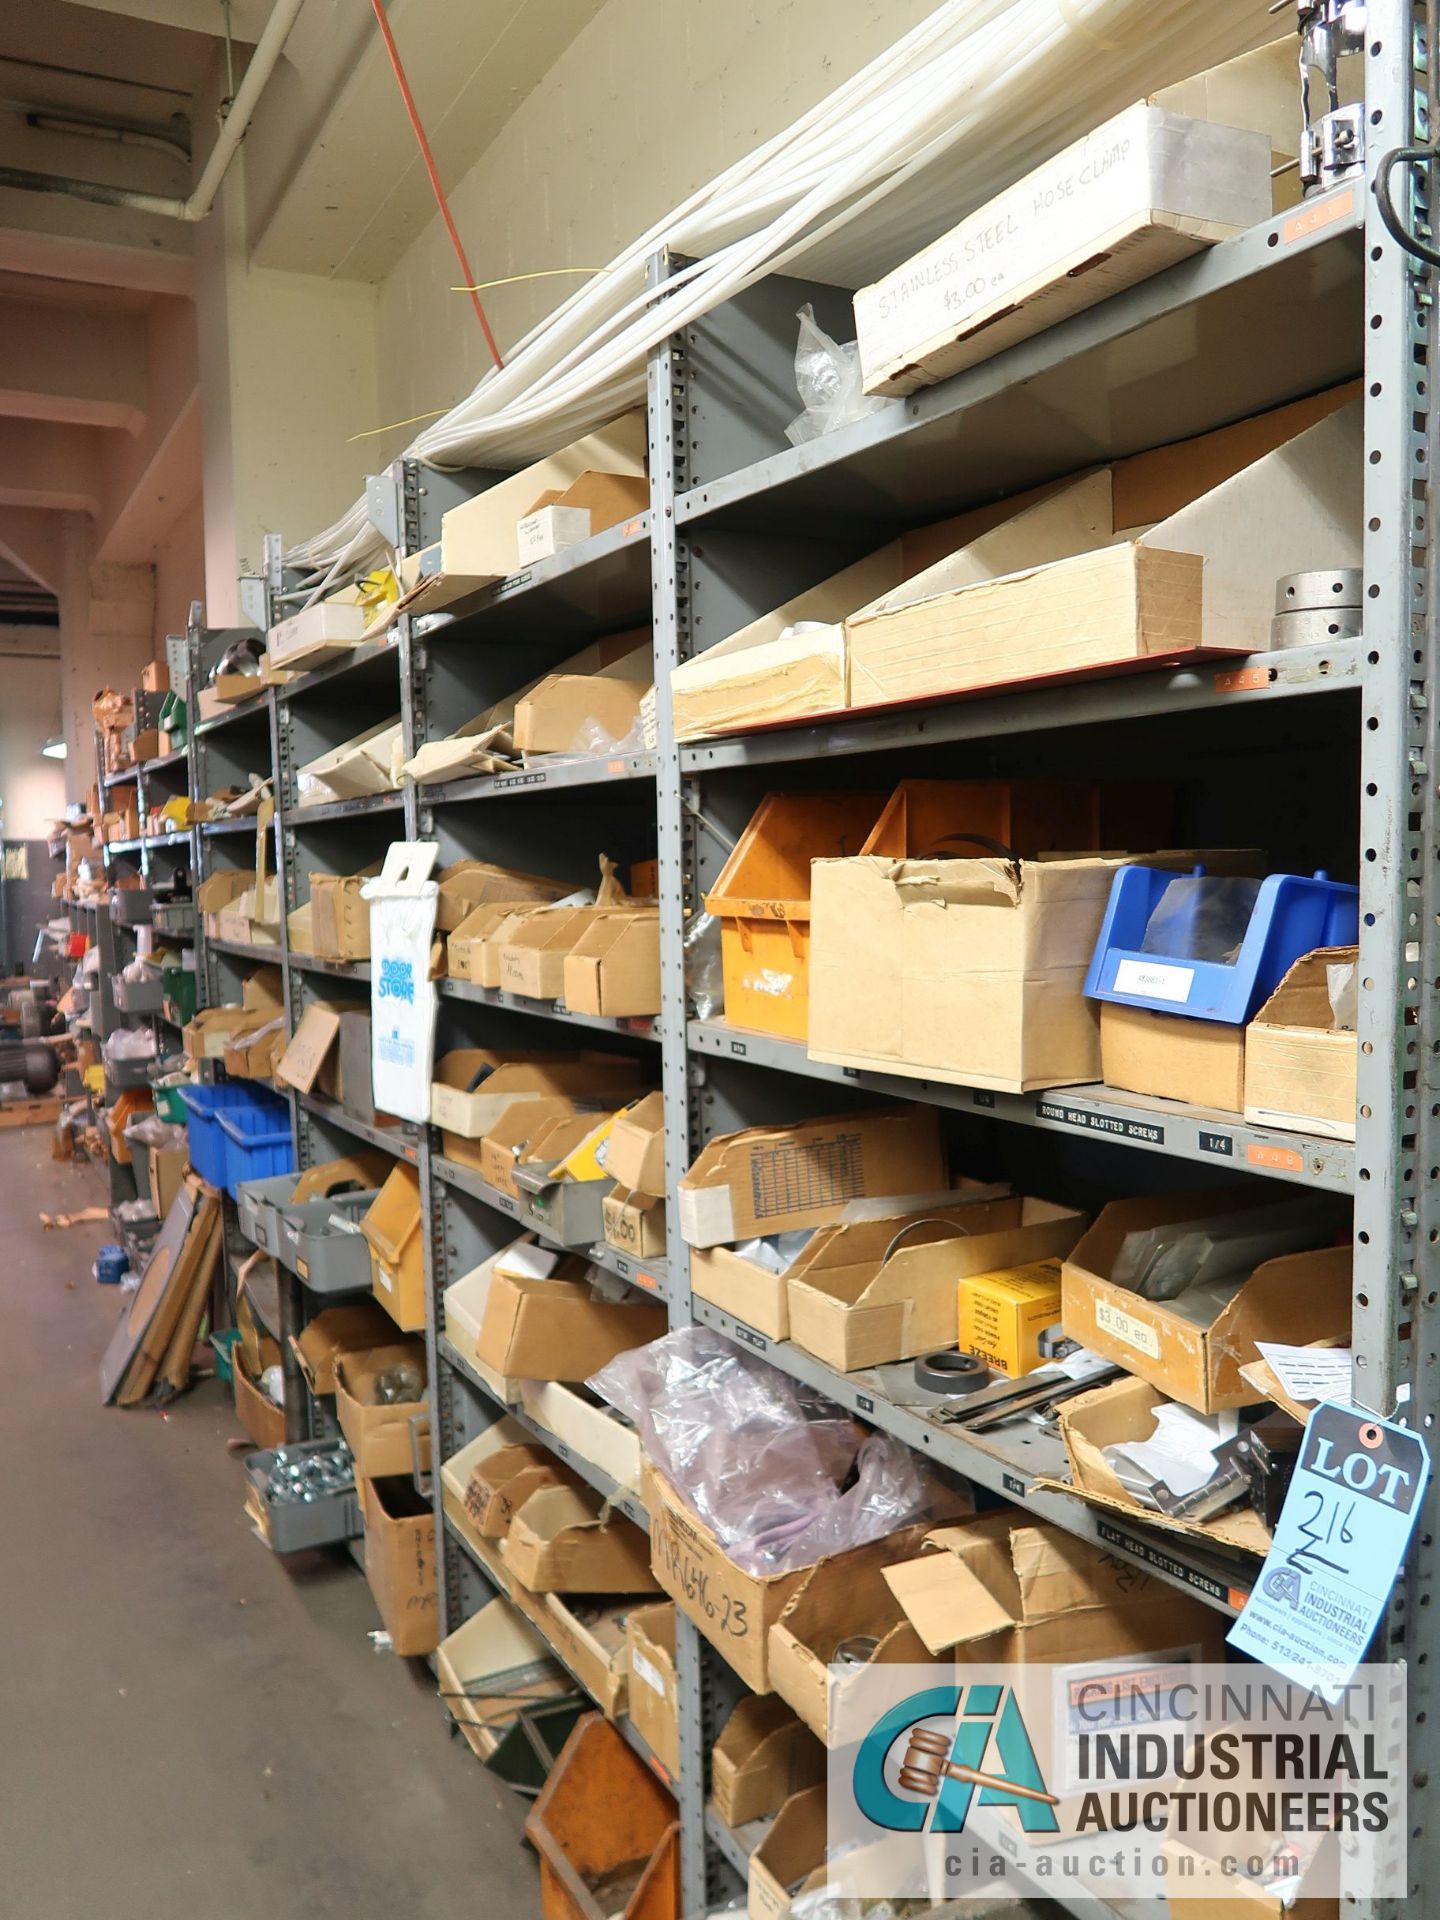 CONTENTS OF (7) SHELVES INCLUDING MISCELLANEOUS BRACKETS, CLAMPS, HINGES **NO SHELVES** - Image 19 of 19